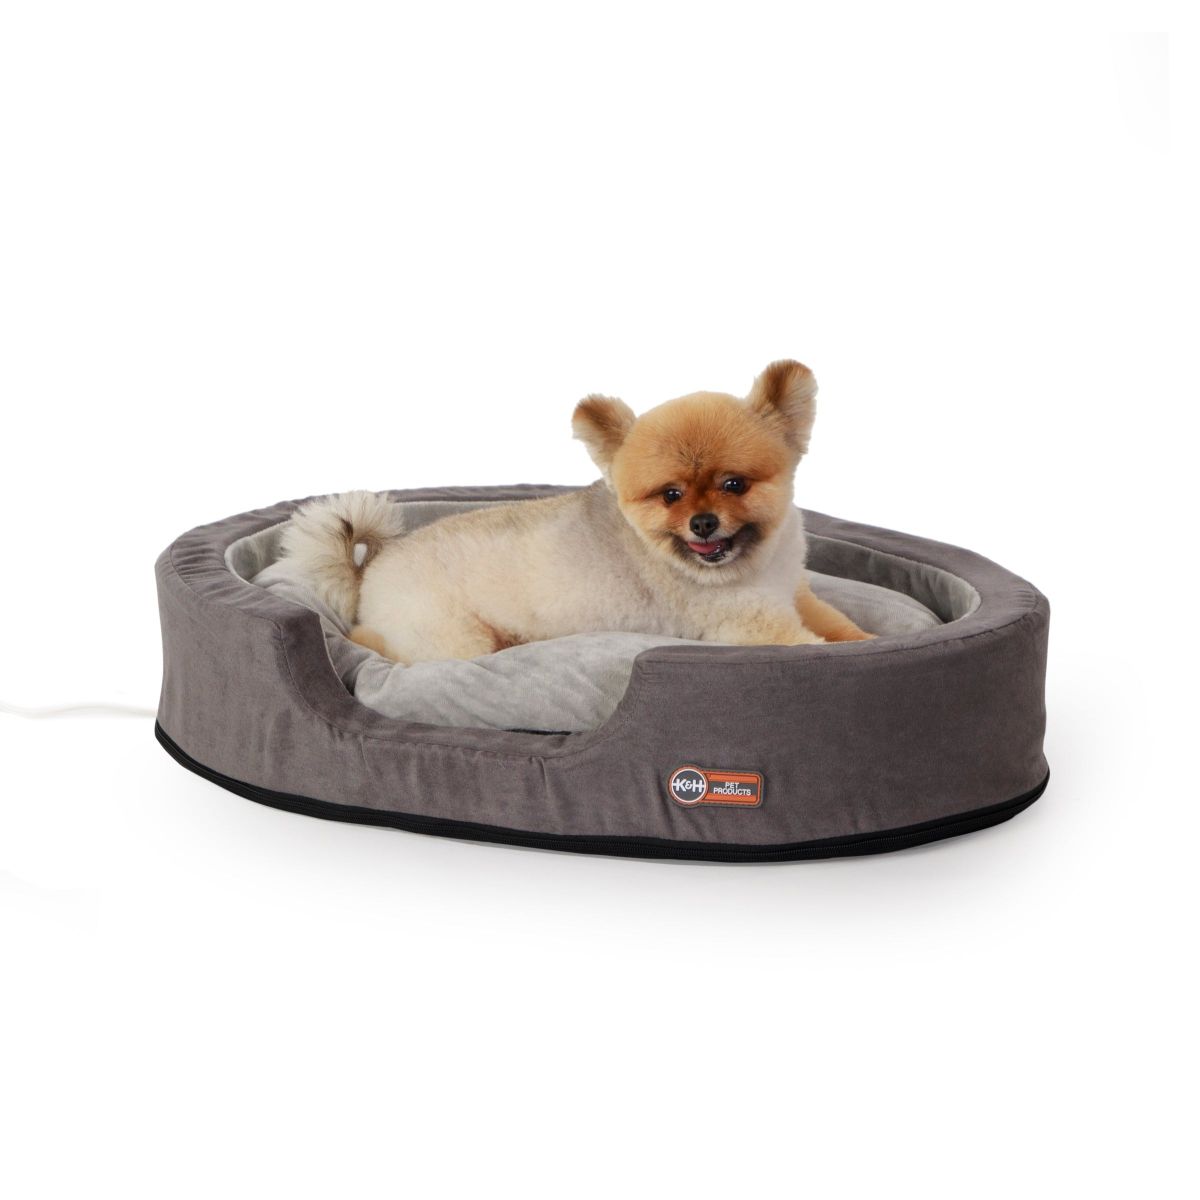 K&H Pet Products Thermo-Snuggly Sleeper Heated Pet Bed